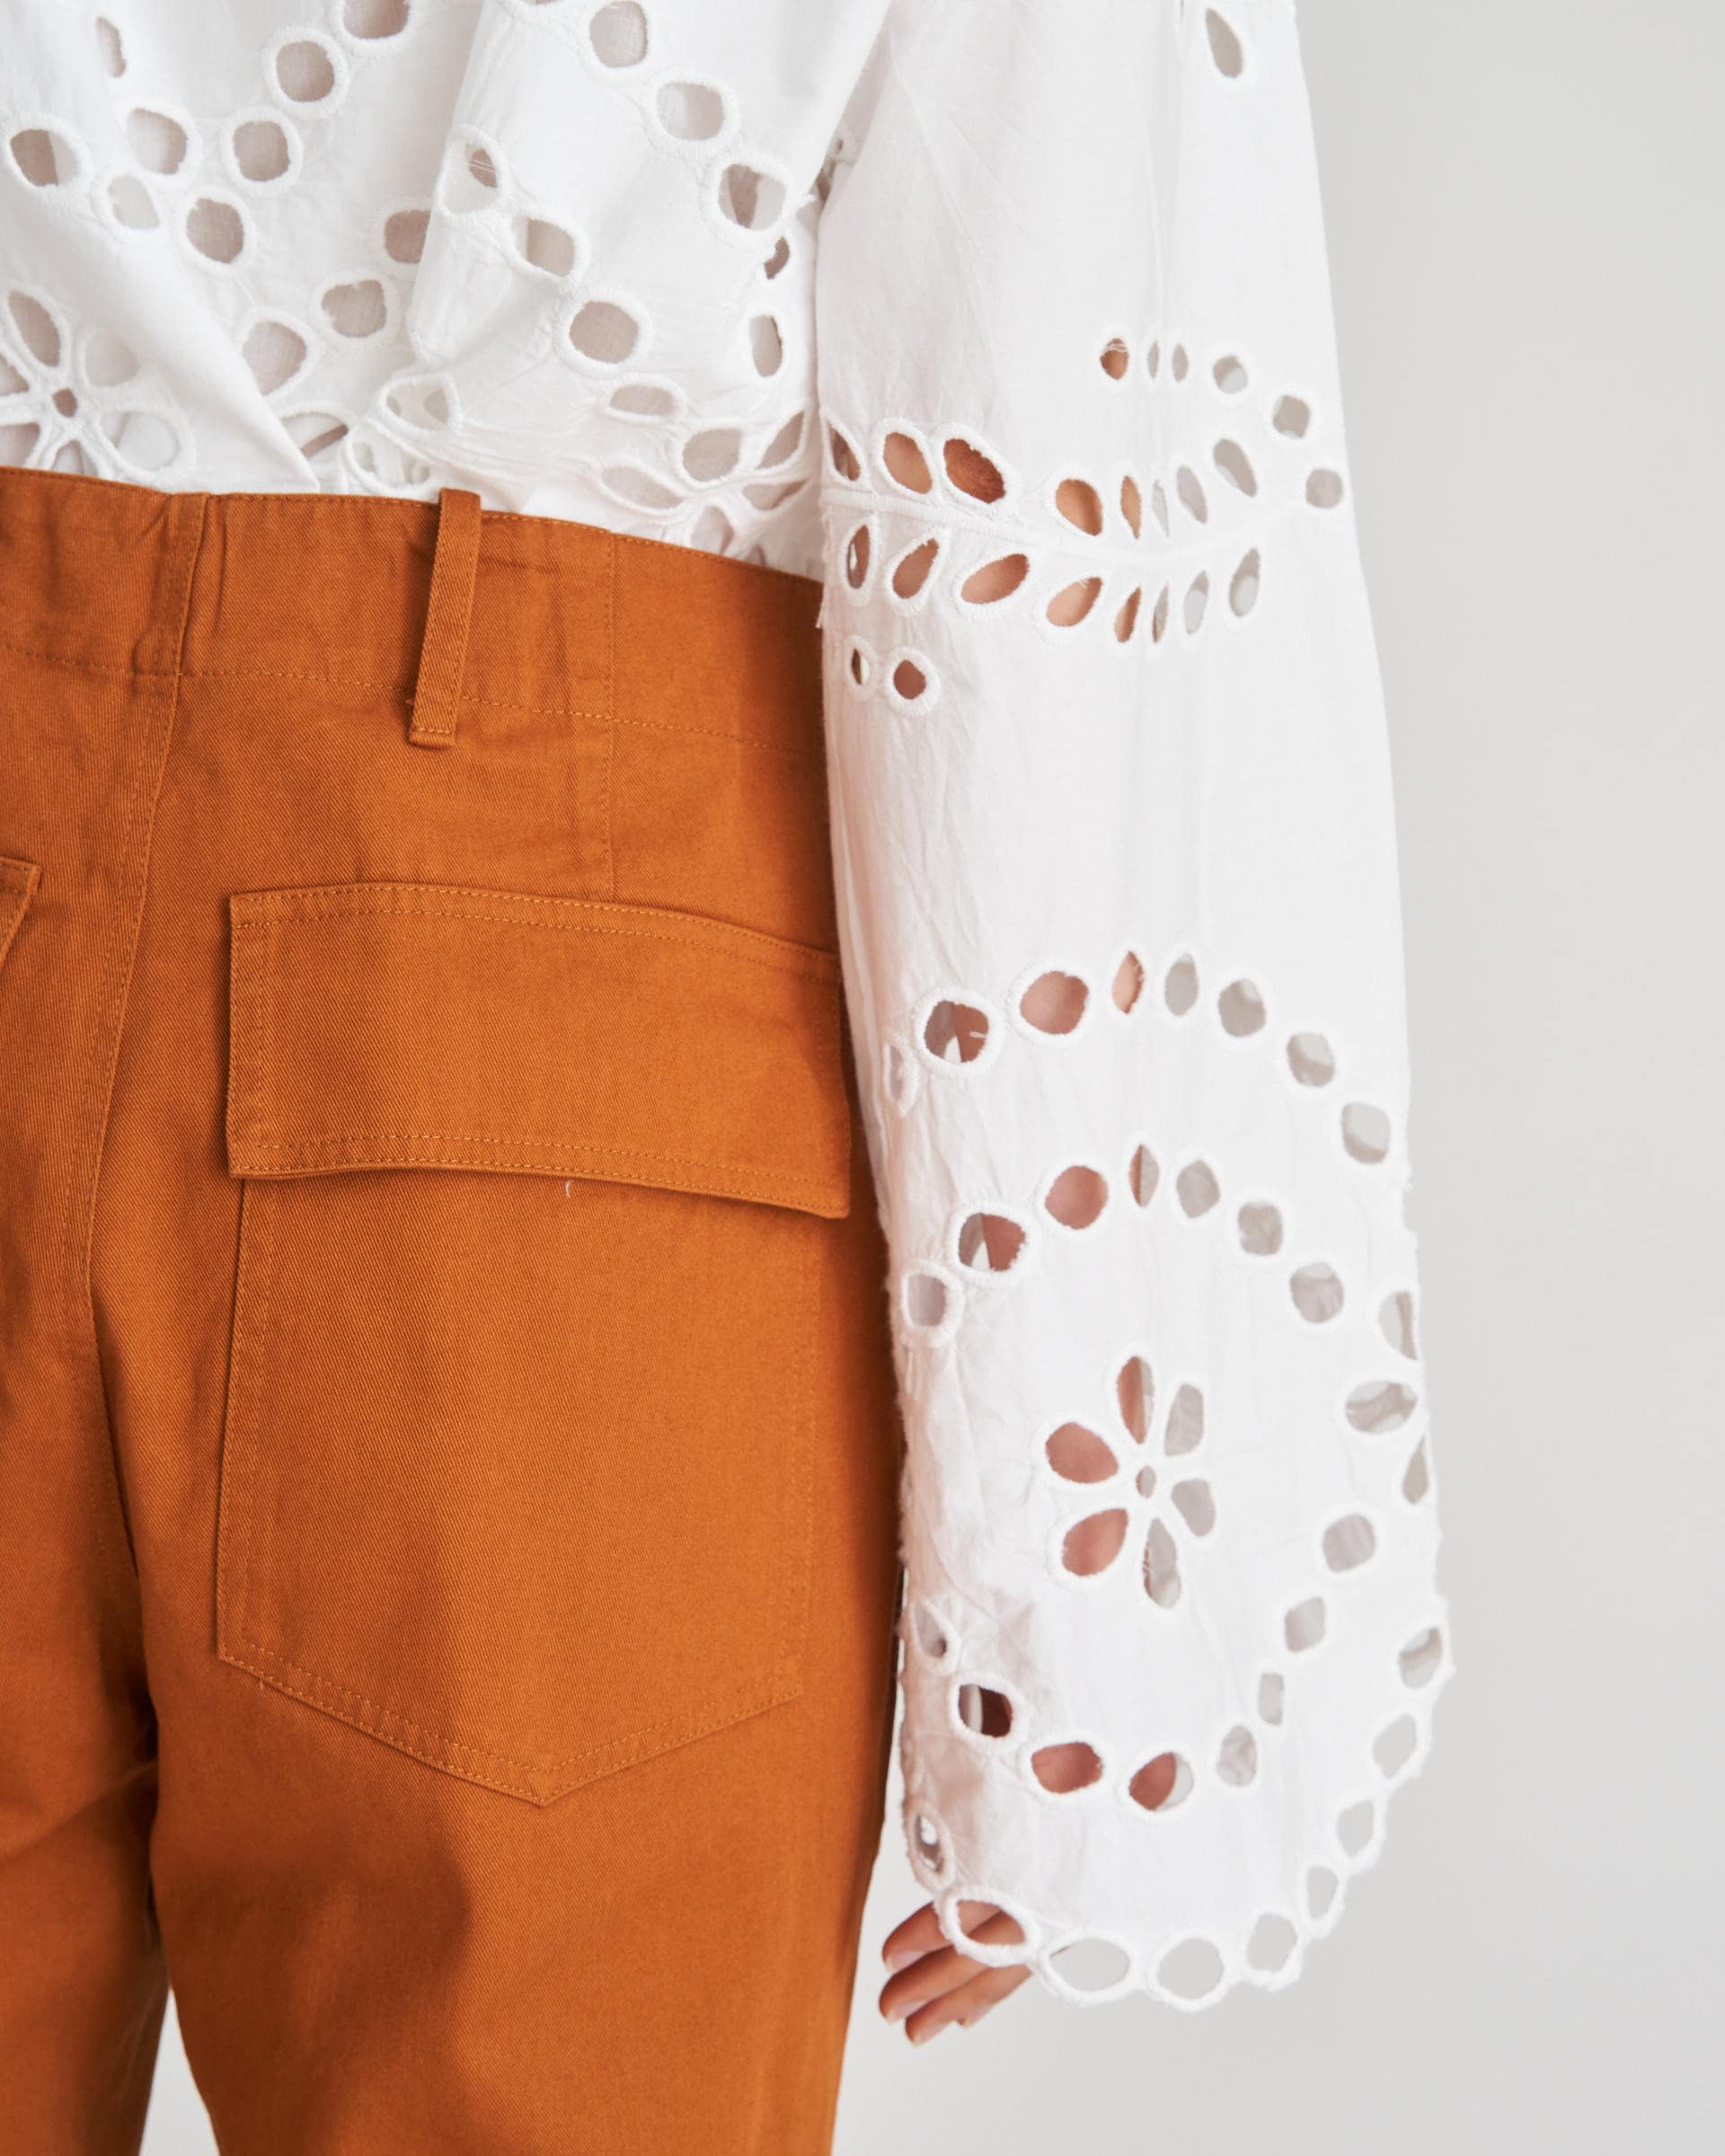 The Market Store | Fatigue Trousers In Cotton